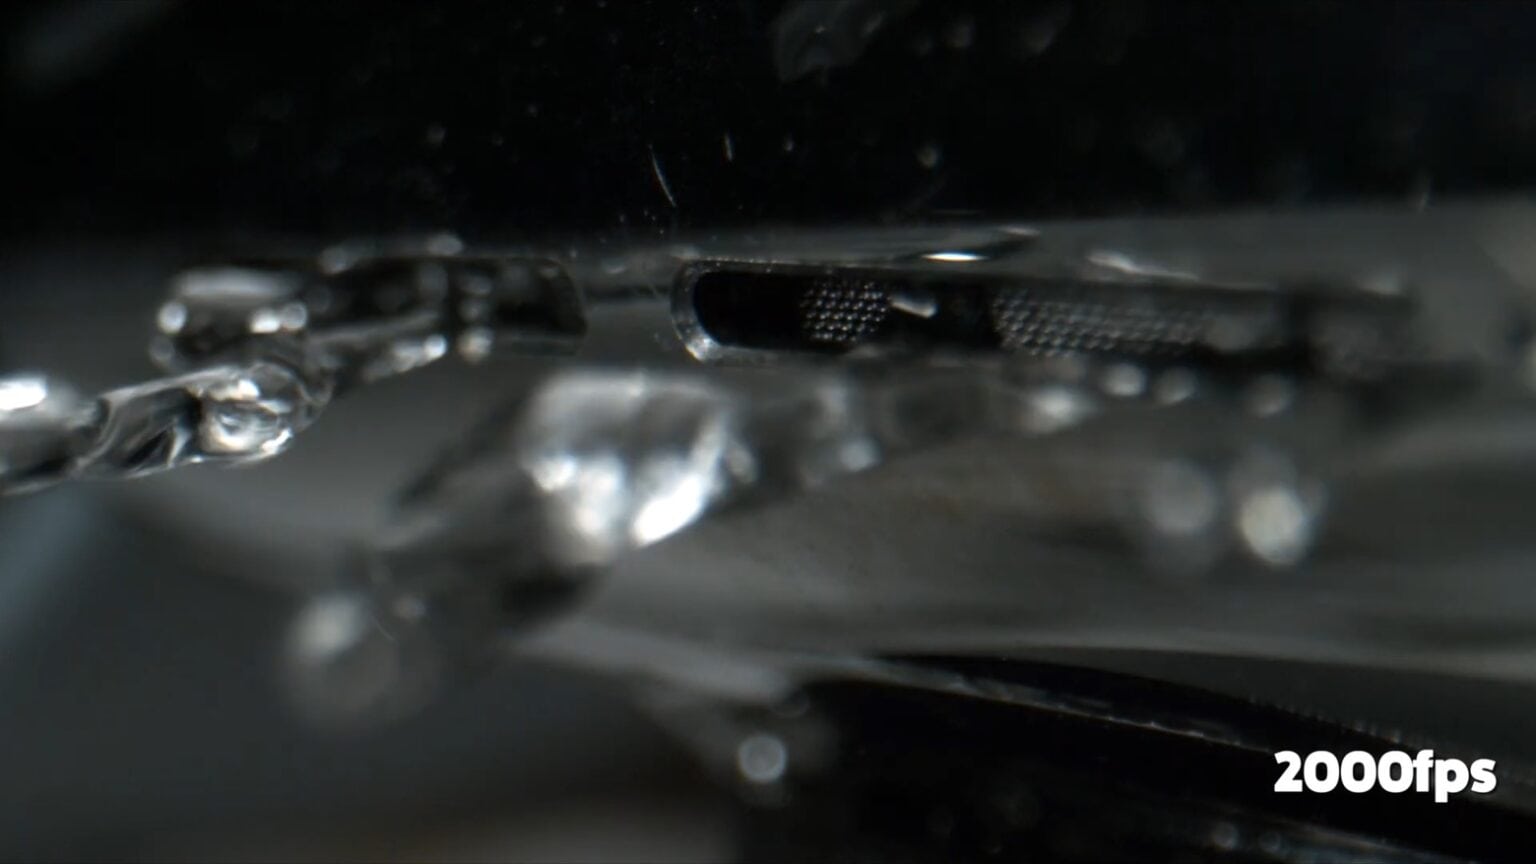 Apple Watch spits out water.